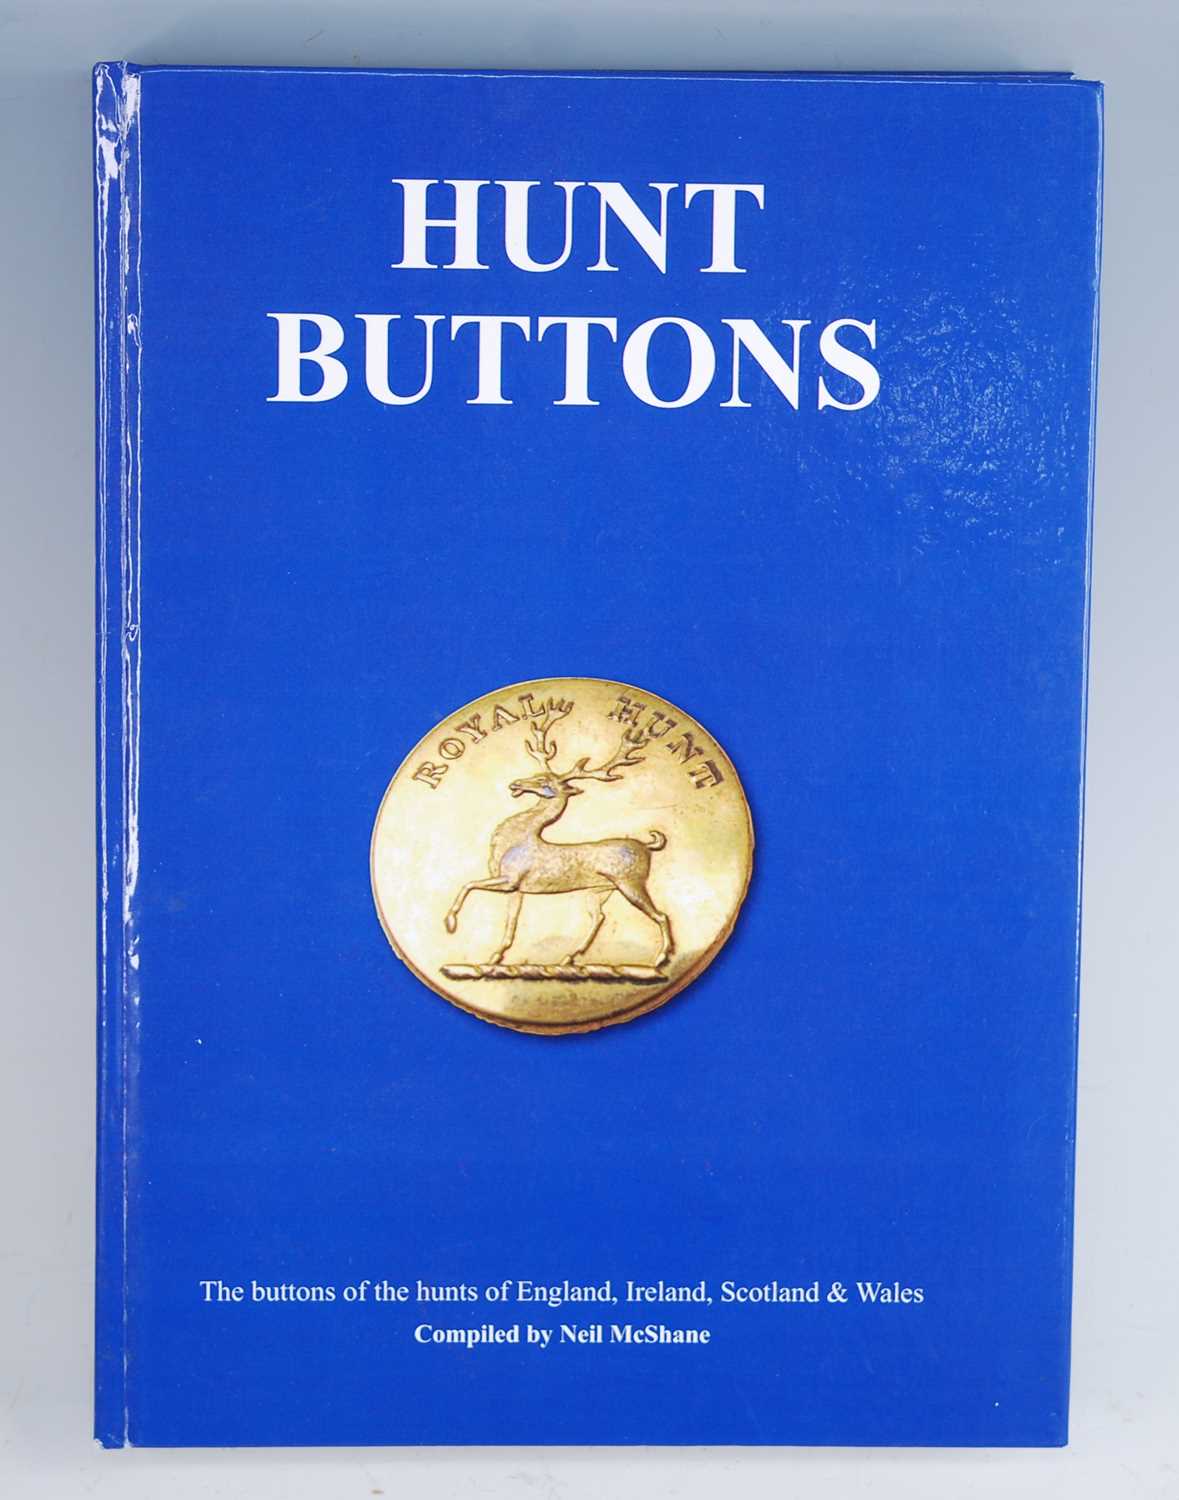 McShane, Neil (compiled); Hunt Buttons The buttons of the hunts of England, Ireland, Scotland and